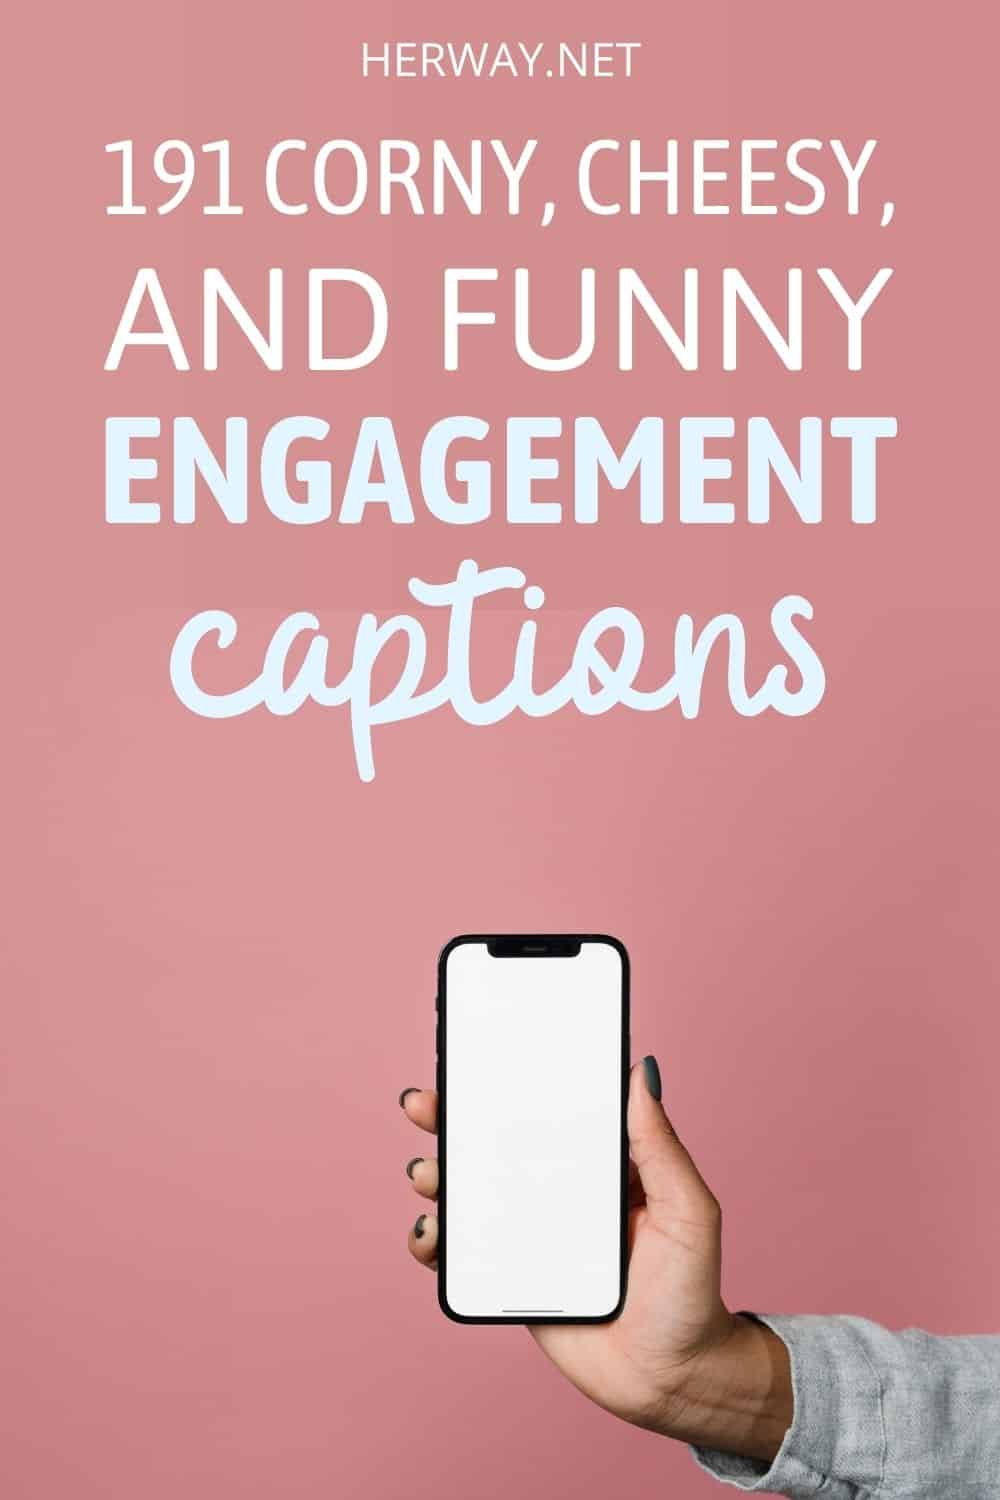 191 Funny Engagement Captions, Song Lyrics, And Quotes Pinterest